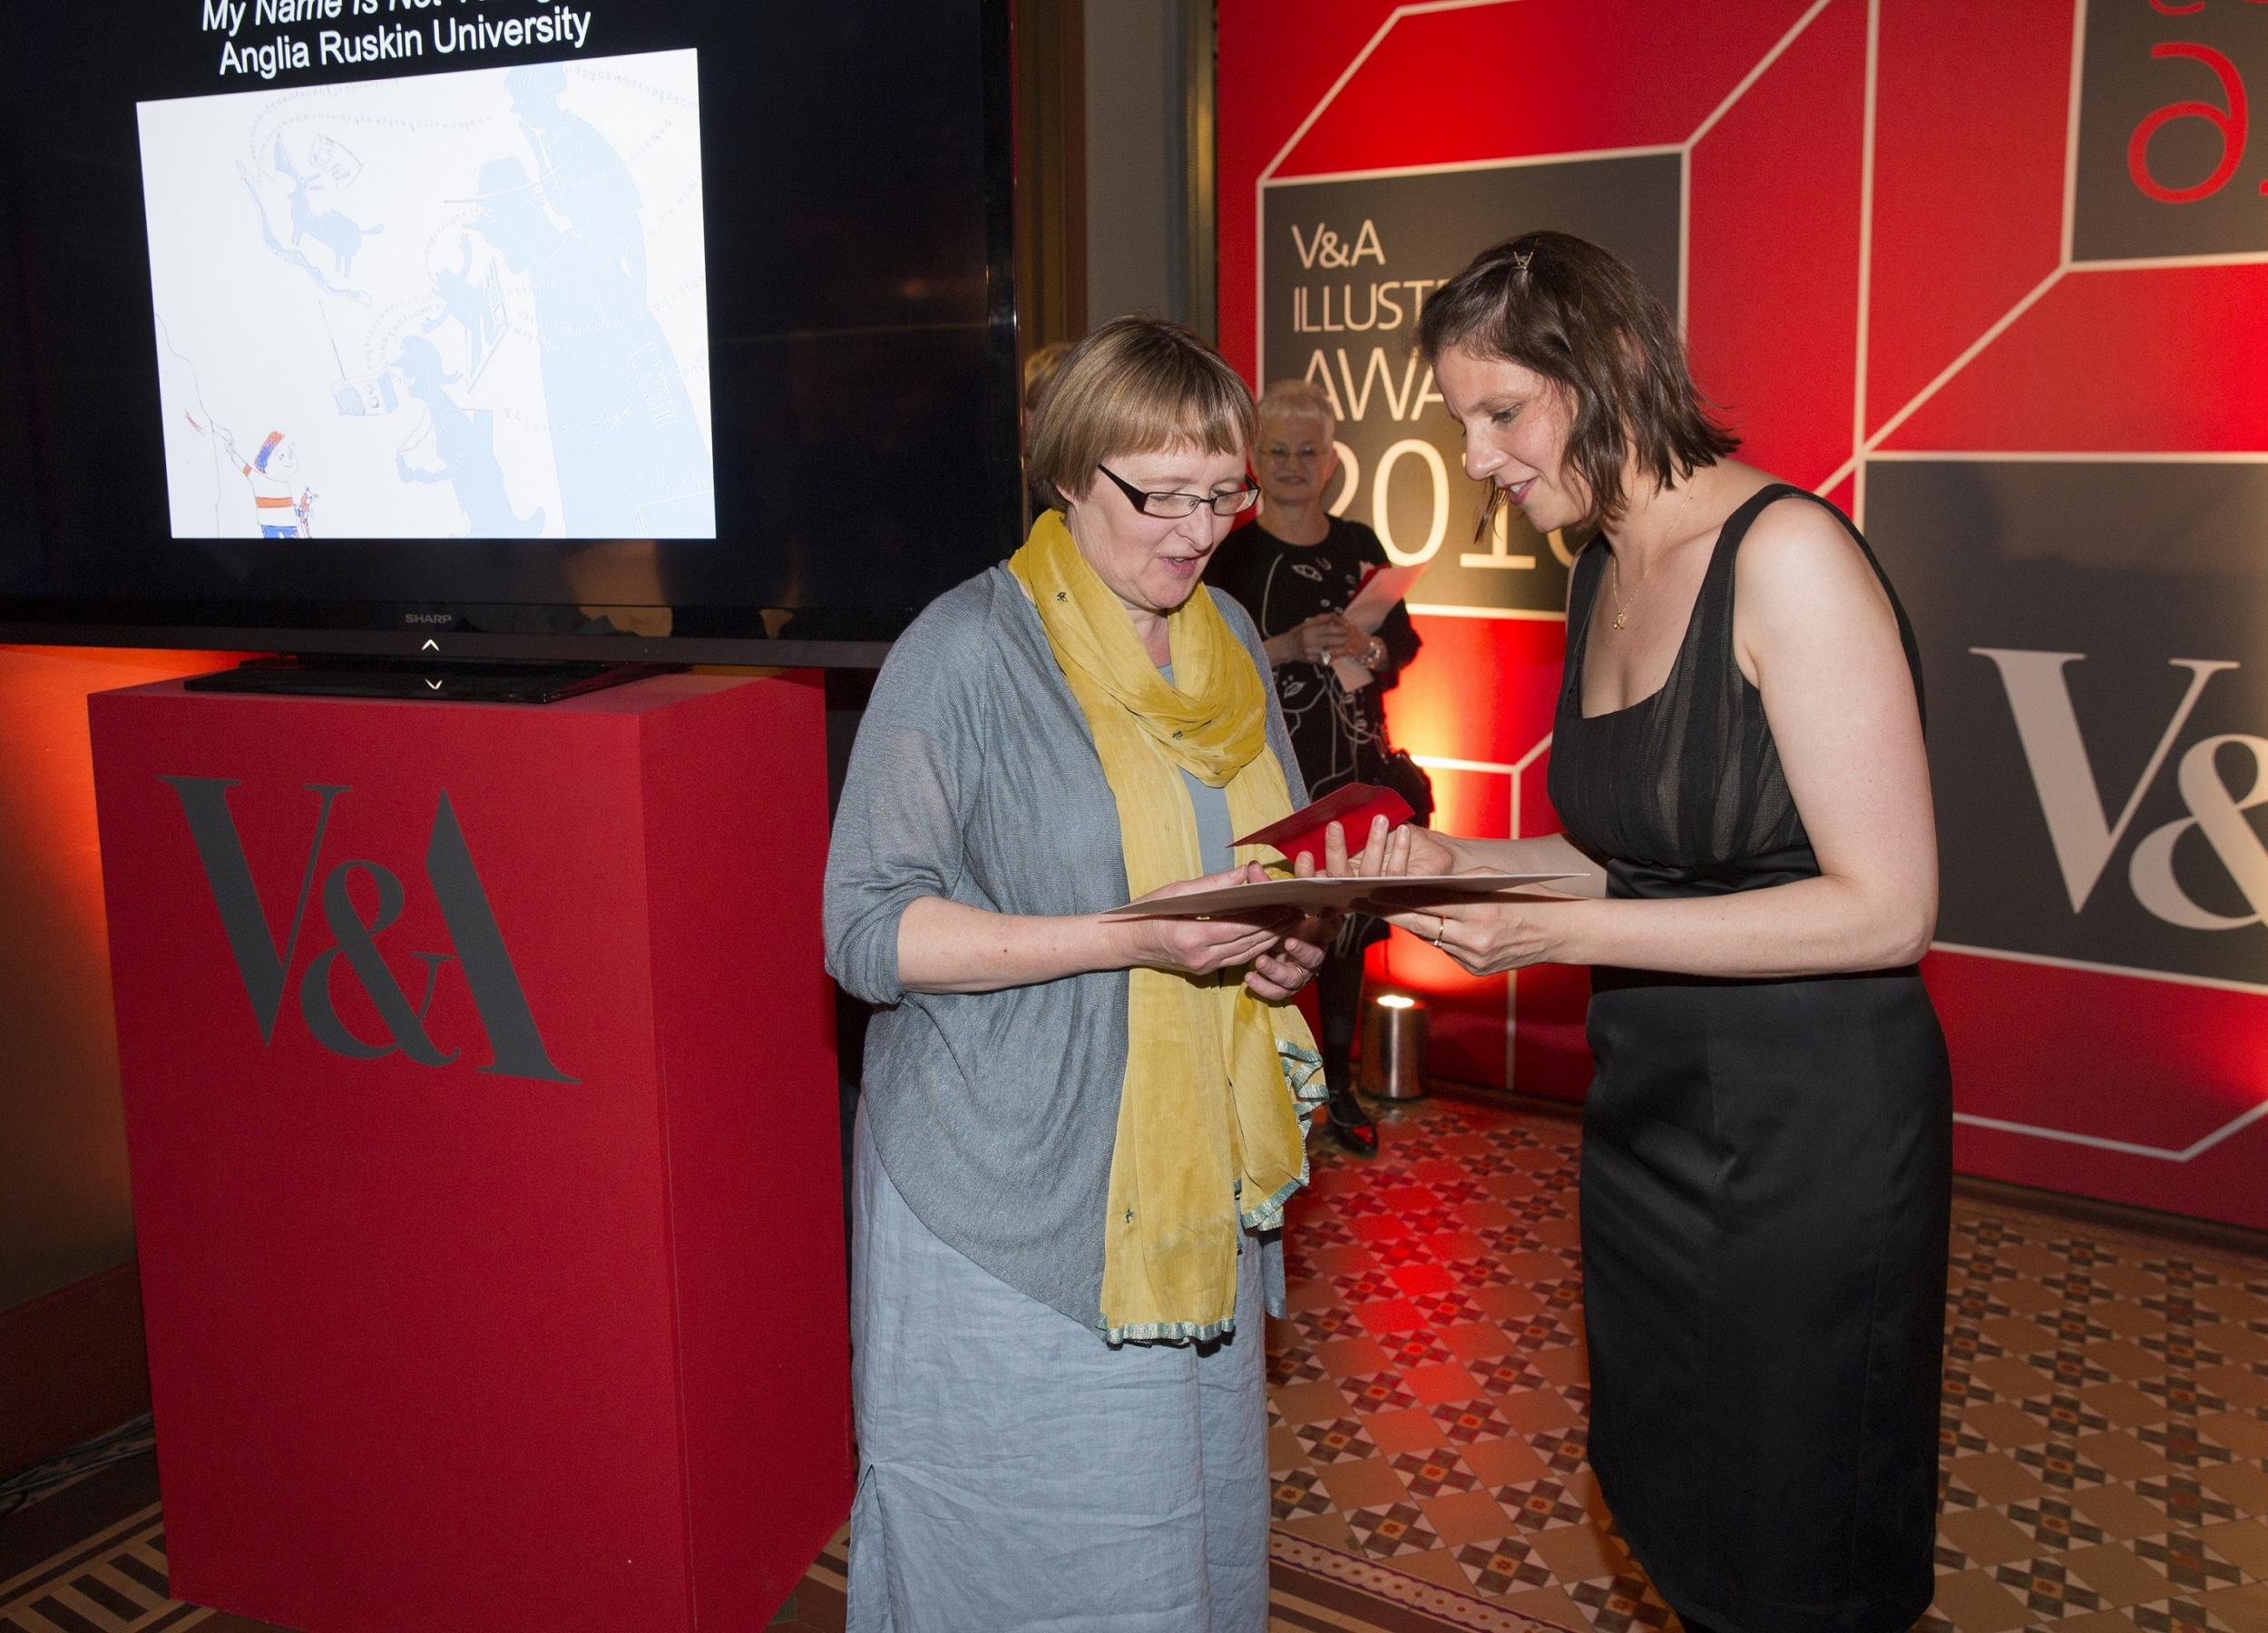 Kate Milner, pictured left, collects her award for Student Illustrator of the Year at V&amp;A’s Illustration Awards